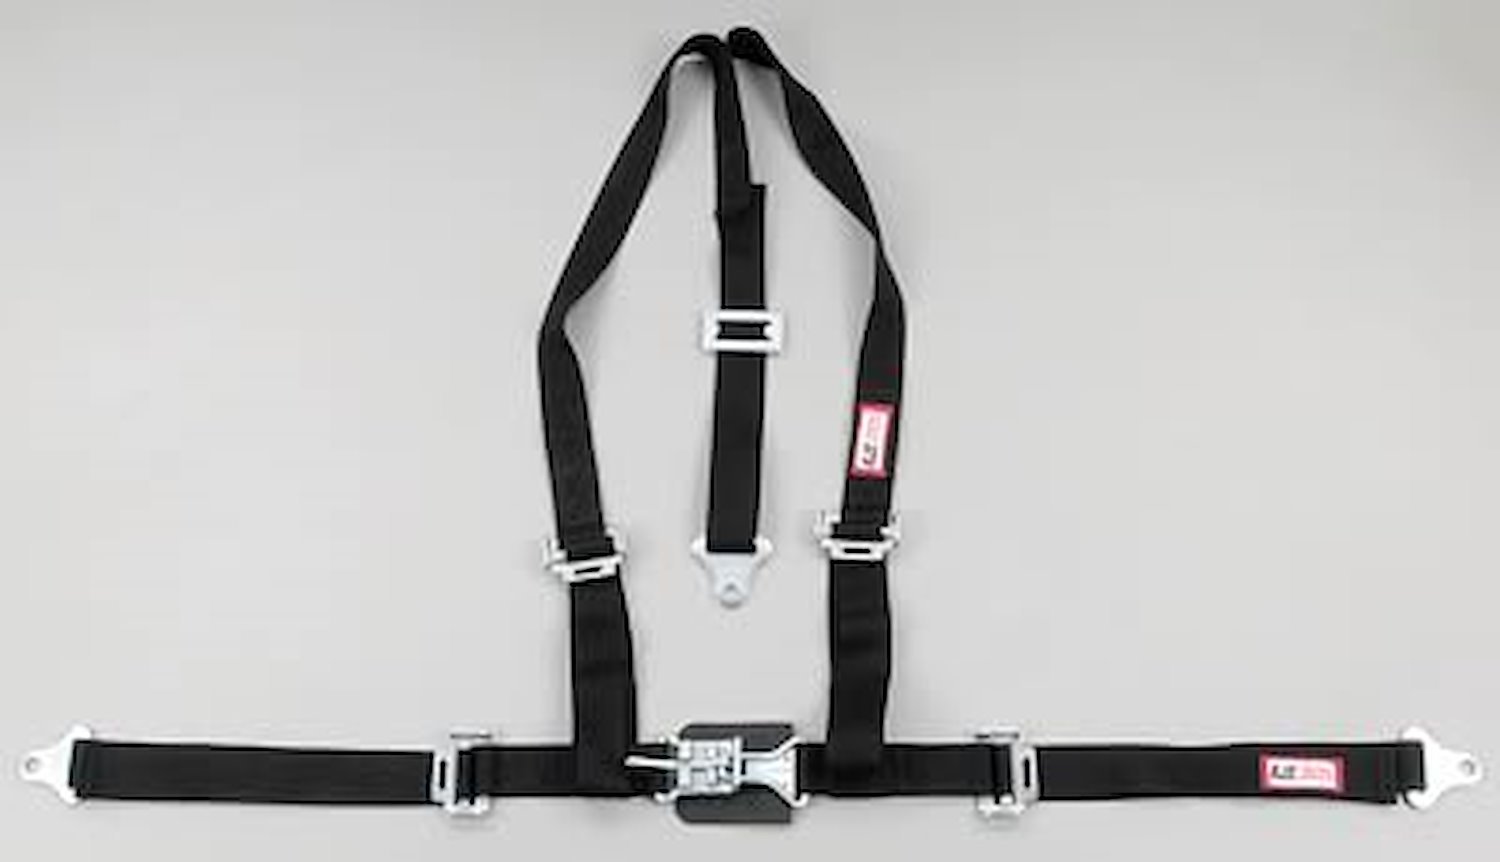 NON-SFI L&L HARNESS 3 PULL DOWN Lap Belt w/Adjuster SNAP 2 S.H. Y FLOOR Mount WRAP/SNAP RED